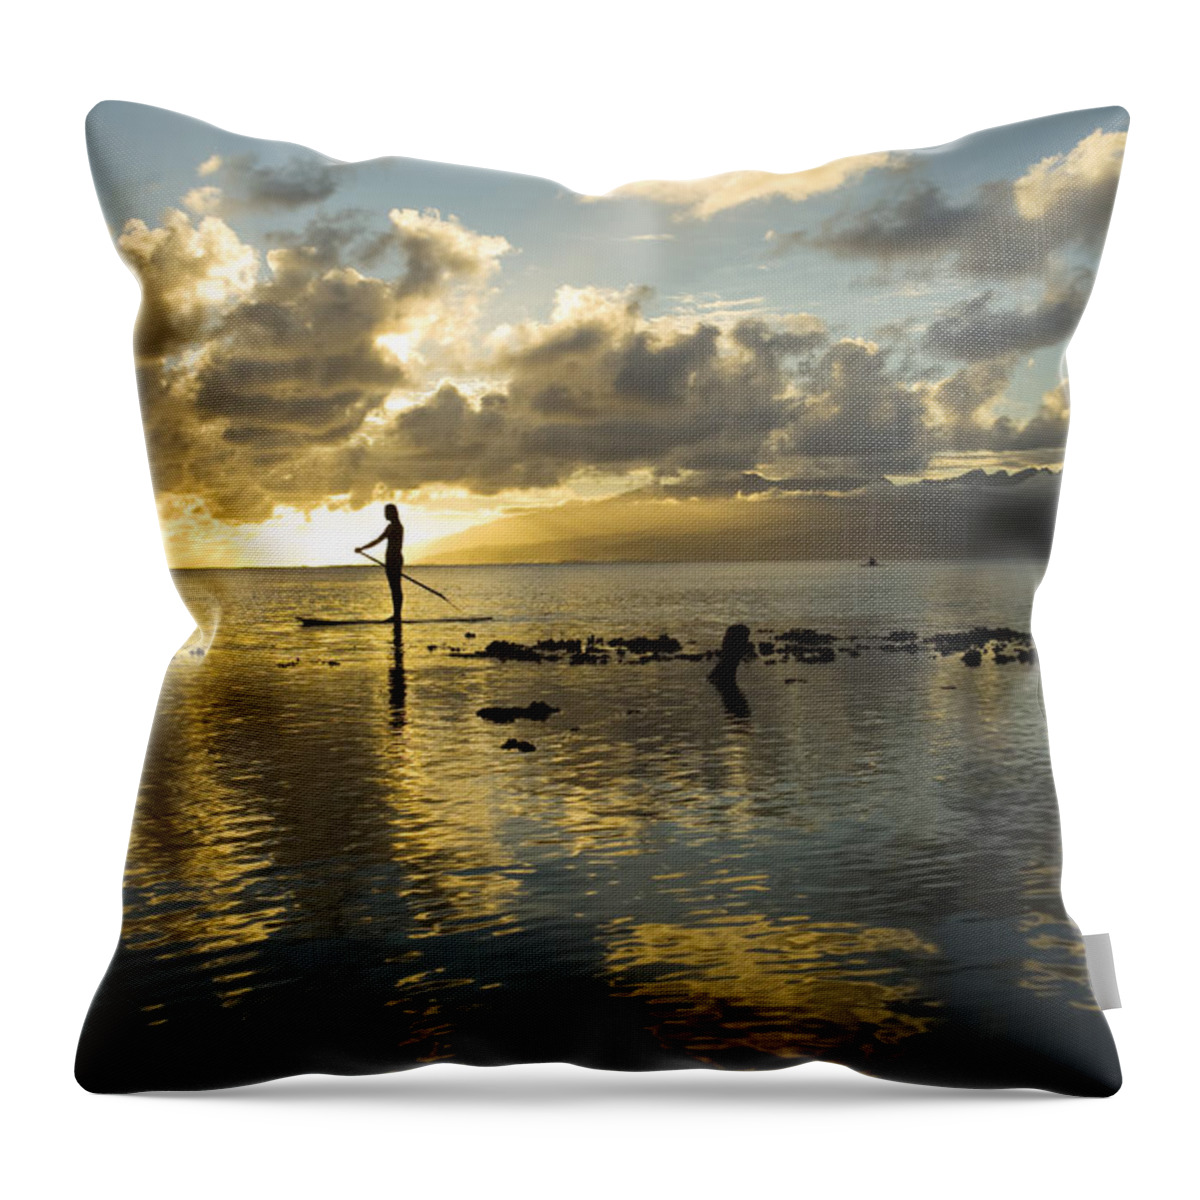 Active Throw Pillow featuring the photograph Sunset Paddler by Dana Edmunds - Printscapes